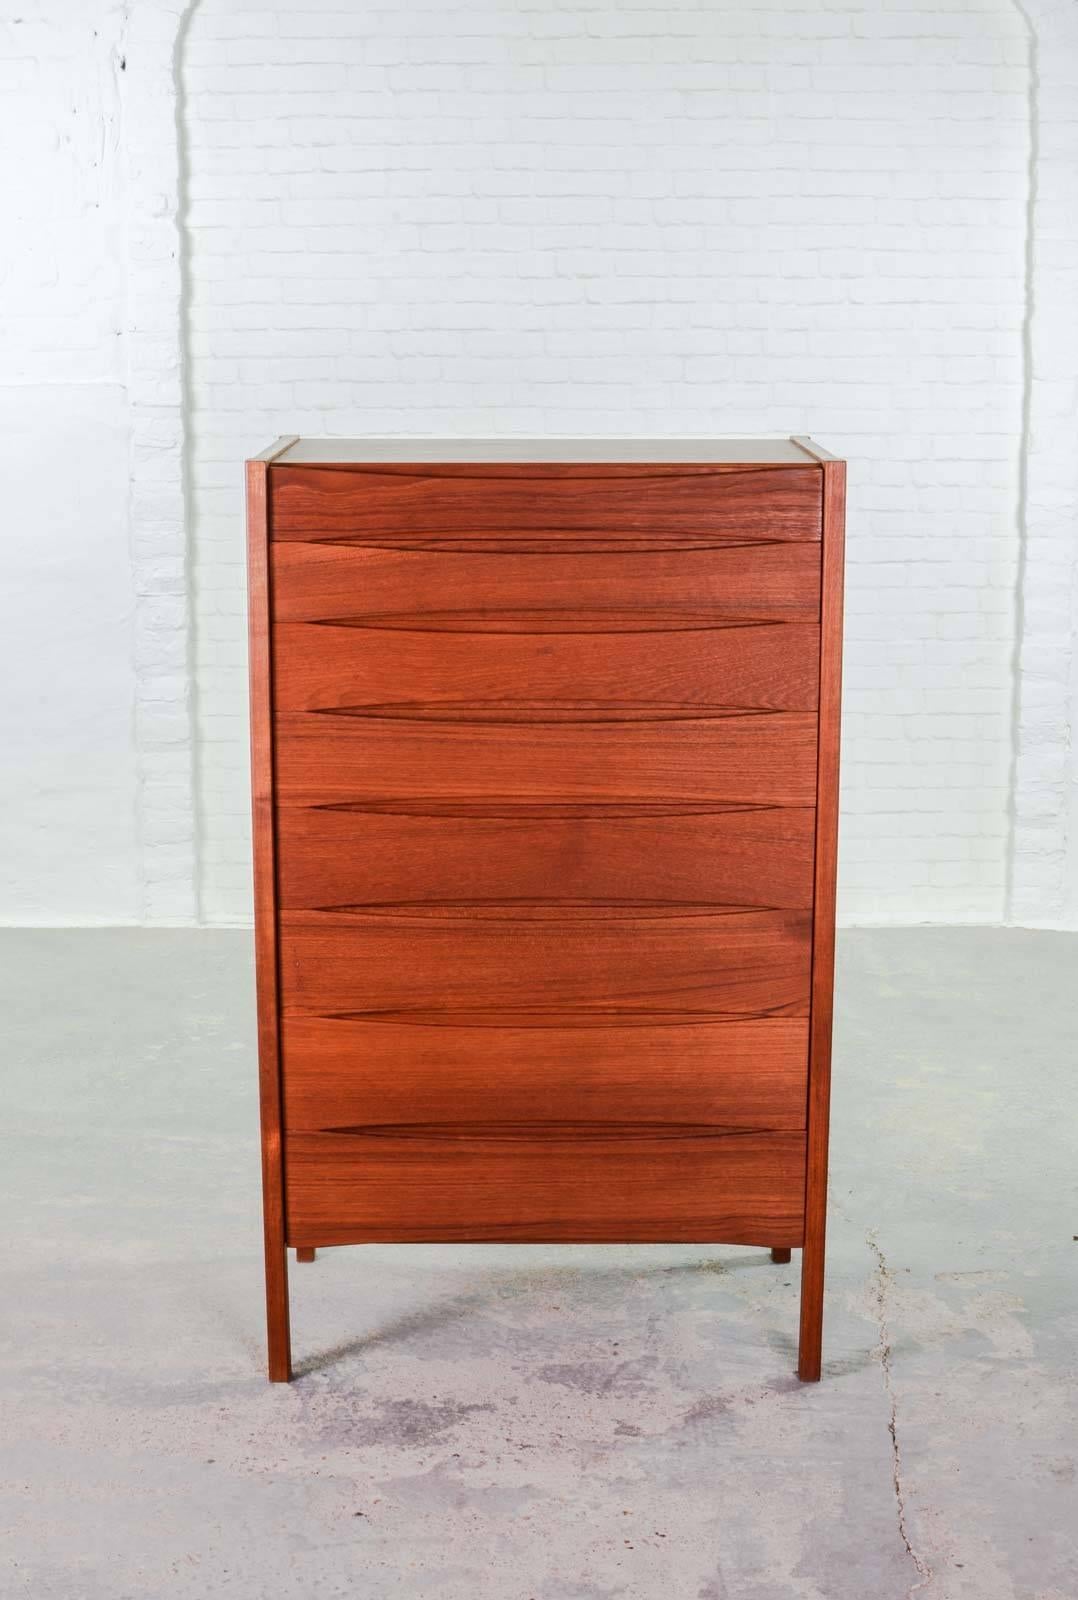 Exclusive Danish tall teak chest of drawers designed in style of Arne Vodder, very likely from the 1960s. Not only the condition is superb, also the design is very refined. The well shaped drawers show the hand of Arne Vodder, although it can not